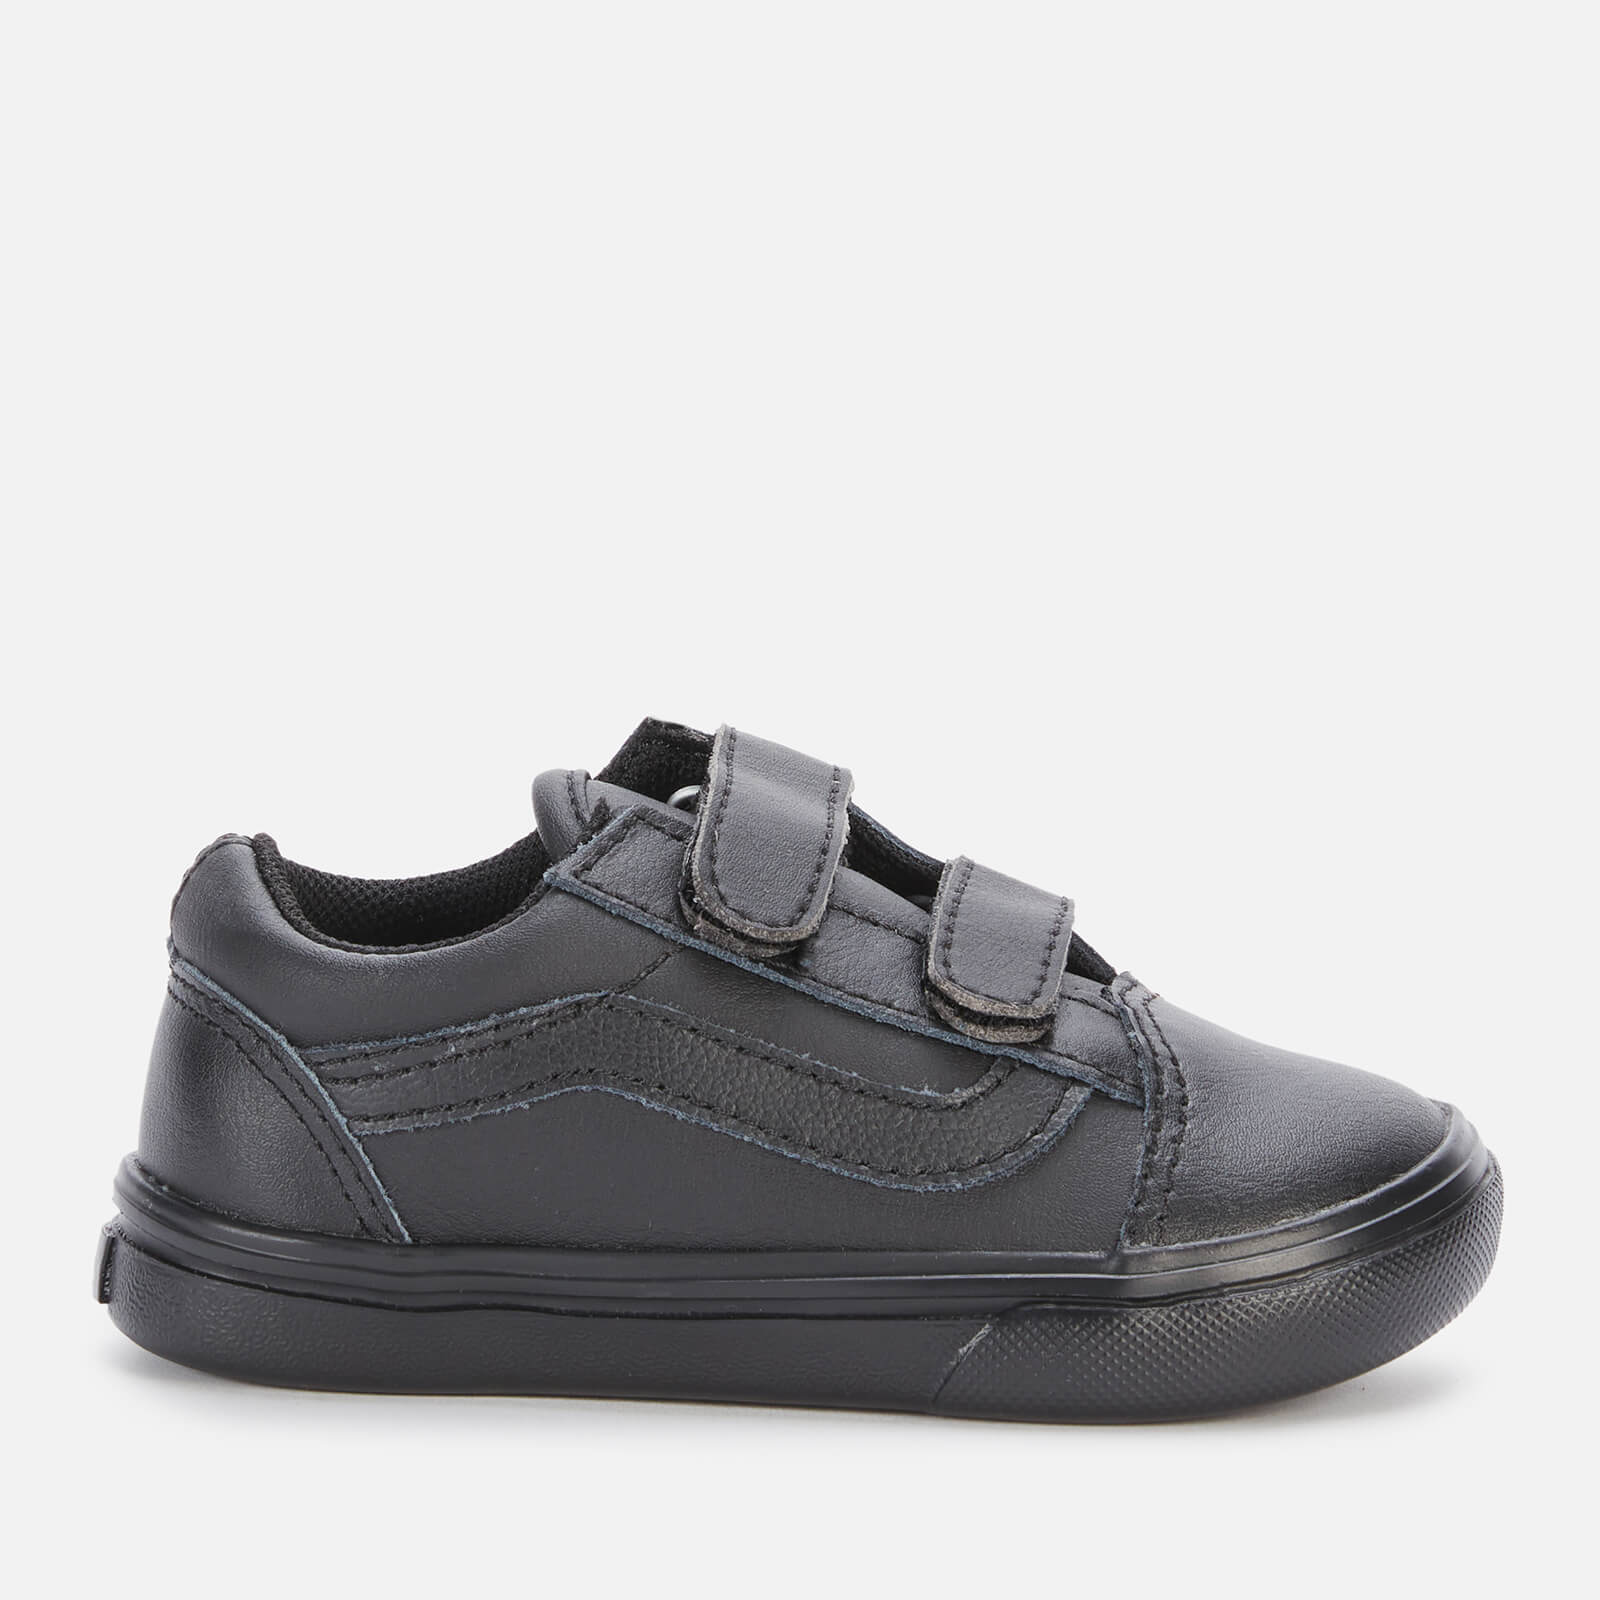 Vans Toddlers' ComfyCush Old Skool Classic Tumble V Trainers - Black - UK 4 Baby